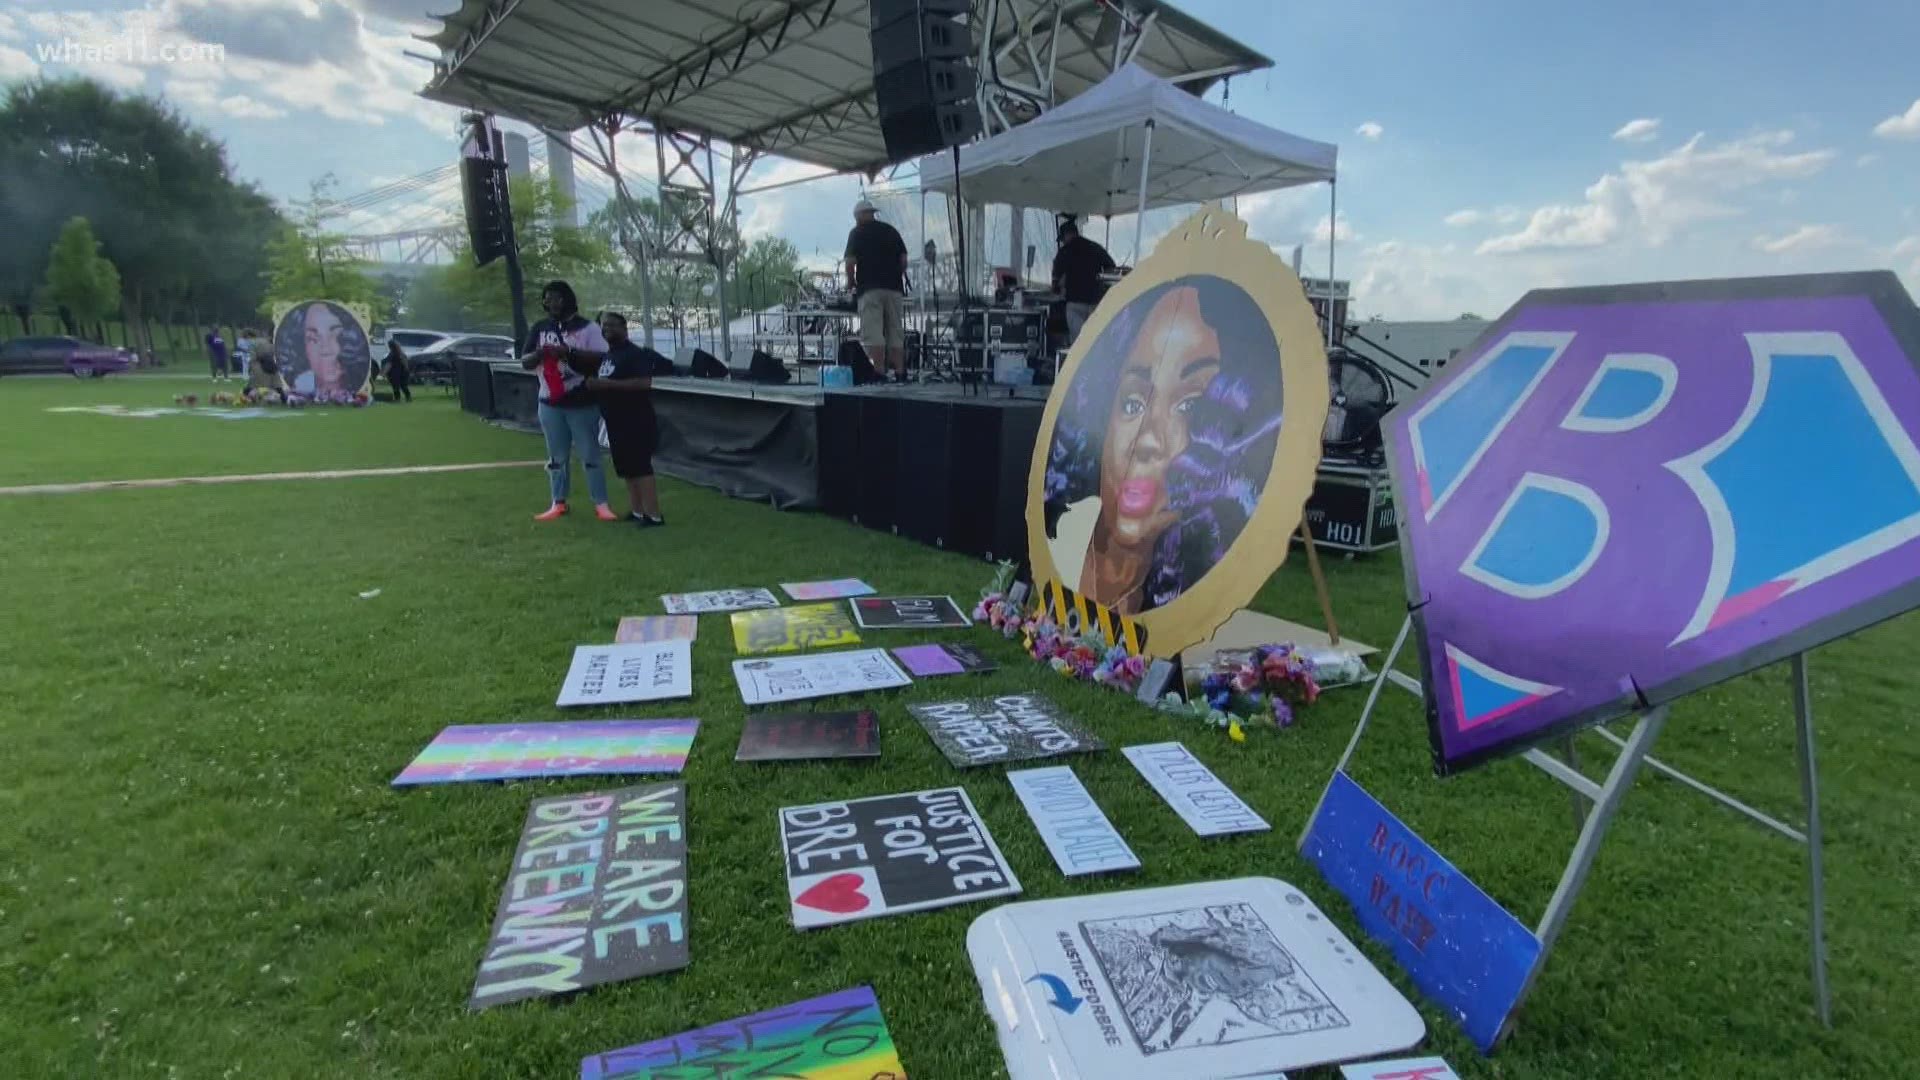 A crowd has gathered at the Big Four Lawn to celebrate what would have been Breonna Taylor's 28th birthday.